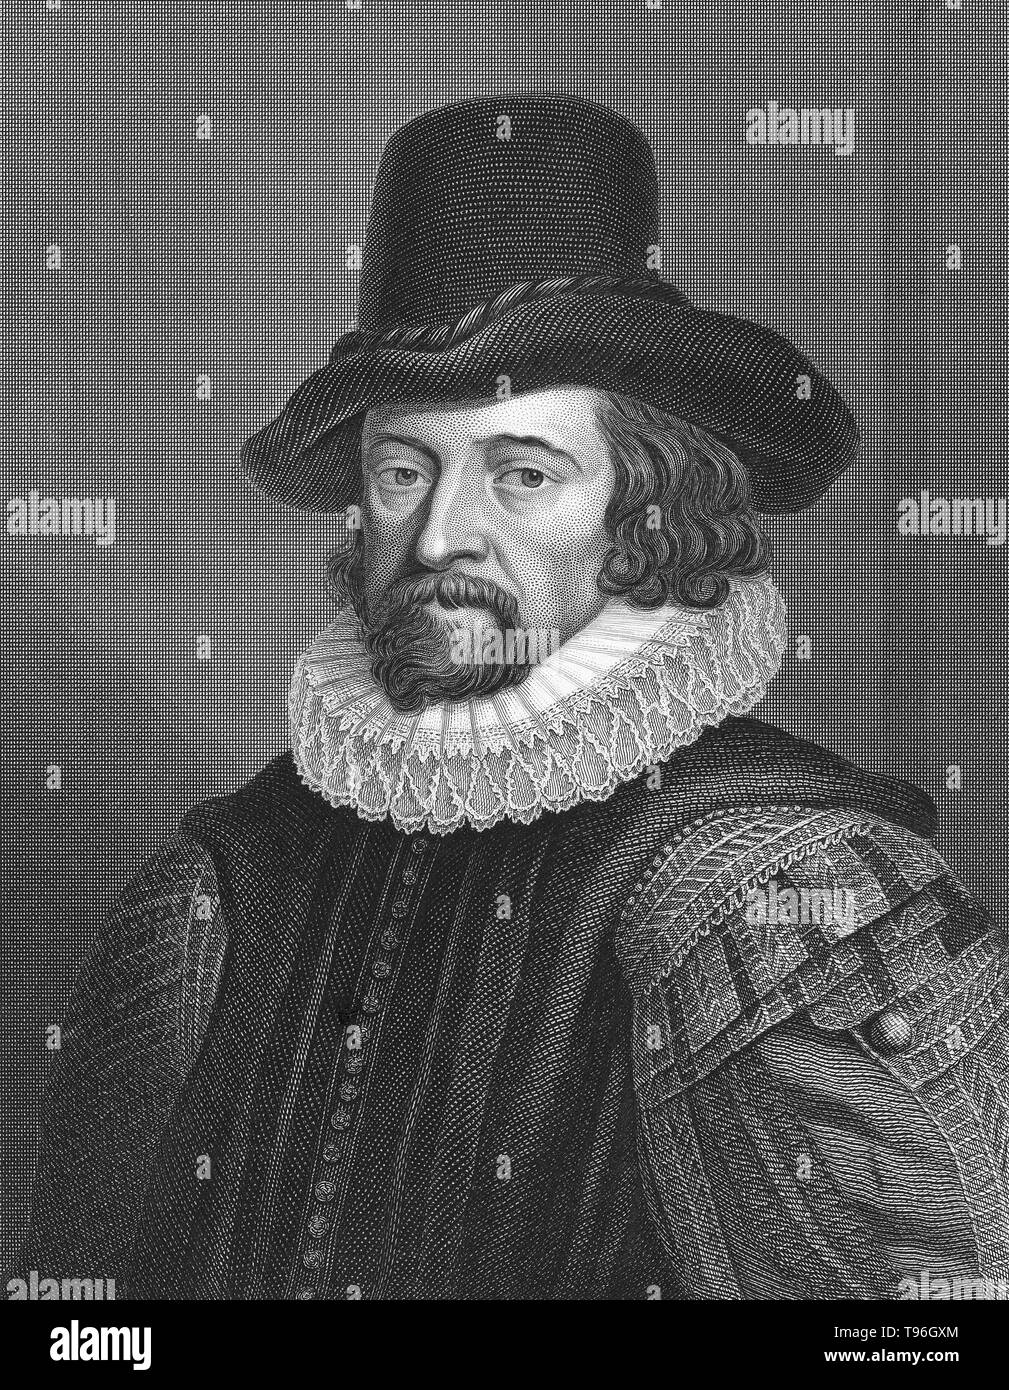 Francis Bacon (January 22, 1561 - April 9, 1626) was an English philosopher, statesman, scientist, lawyer, jurist, author and pioneer of the scientific method. He served both as Attorney General and Lord Chancellor of England. His political career ended in disgrace in 1621. After he fell into debt, a Parliamentary Committee on the administration of the law charged him with twenty-three separate counts of corruption. Stock Photo